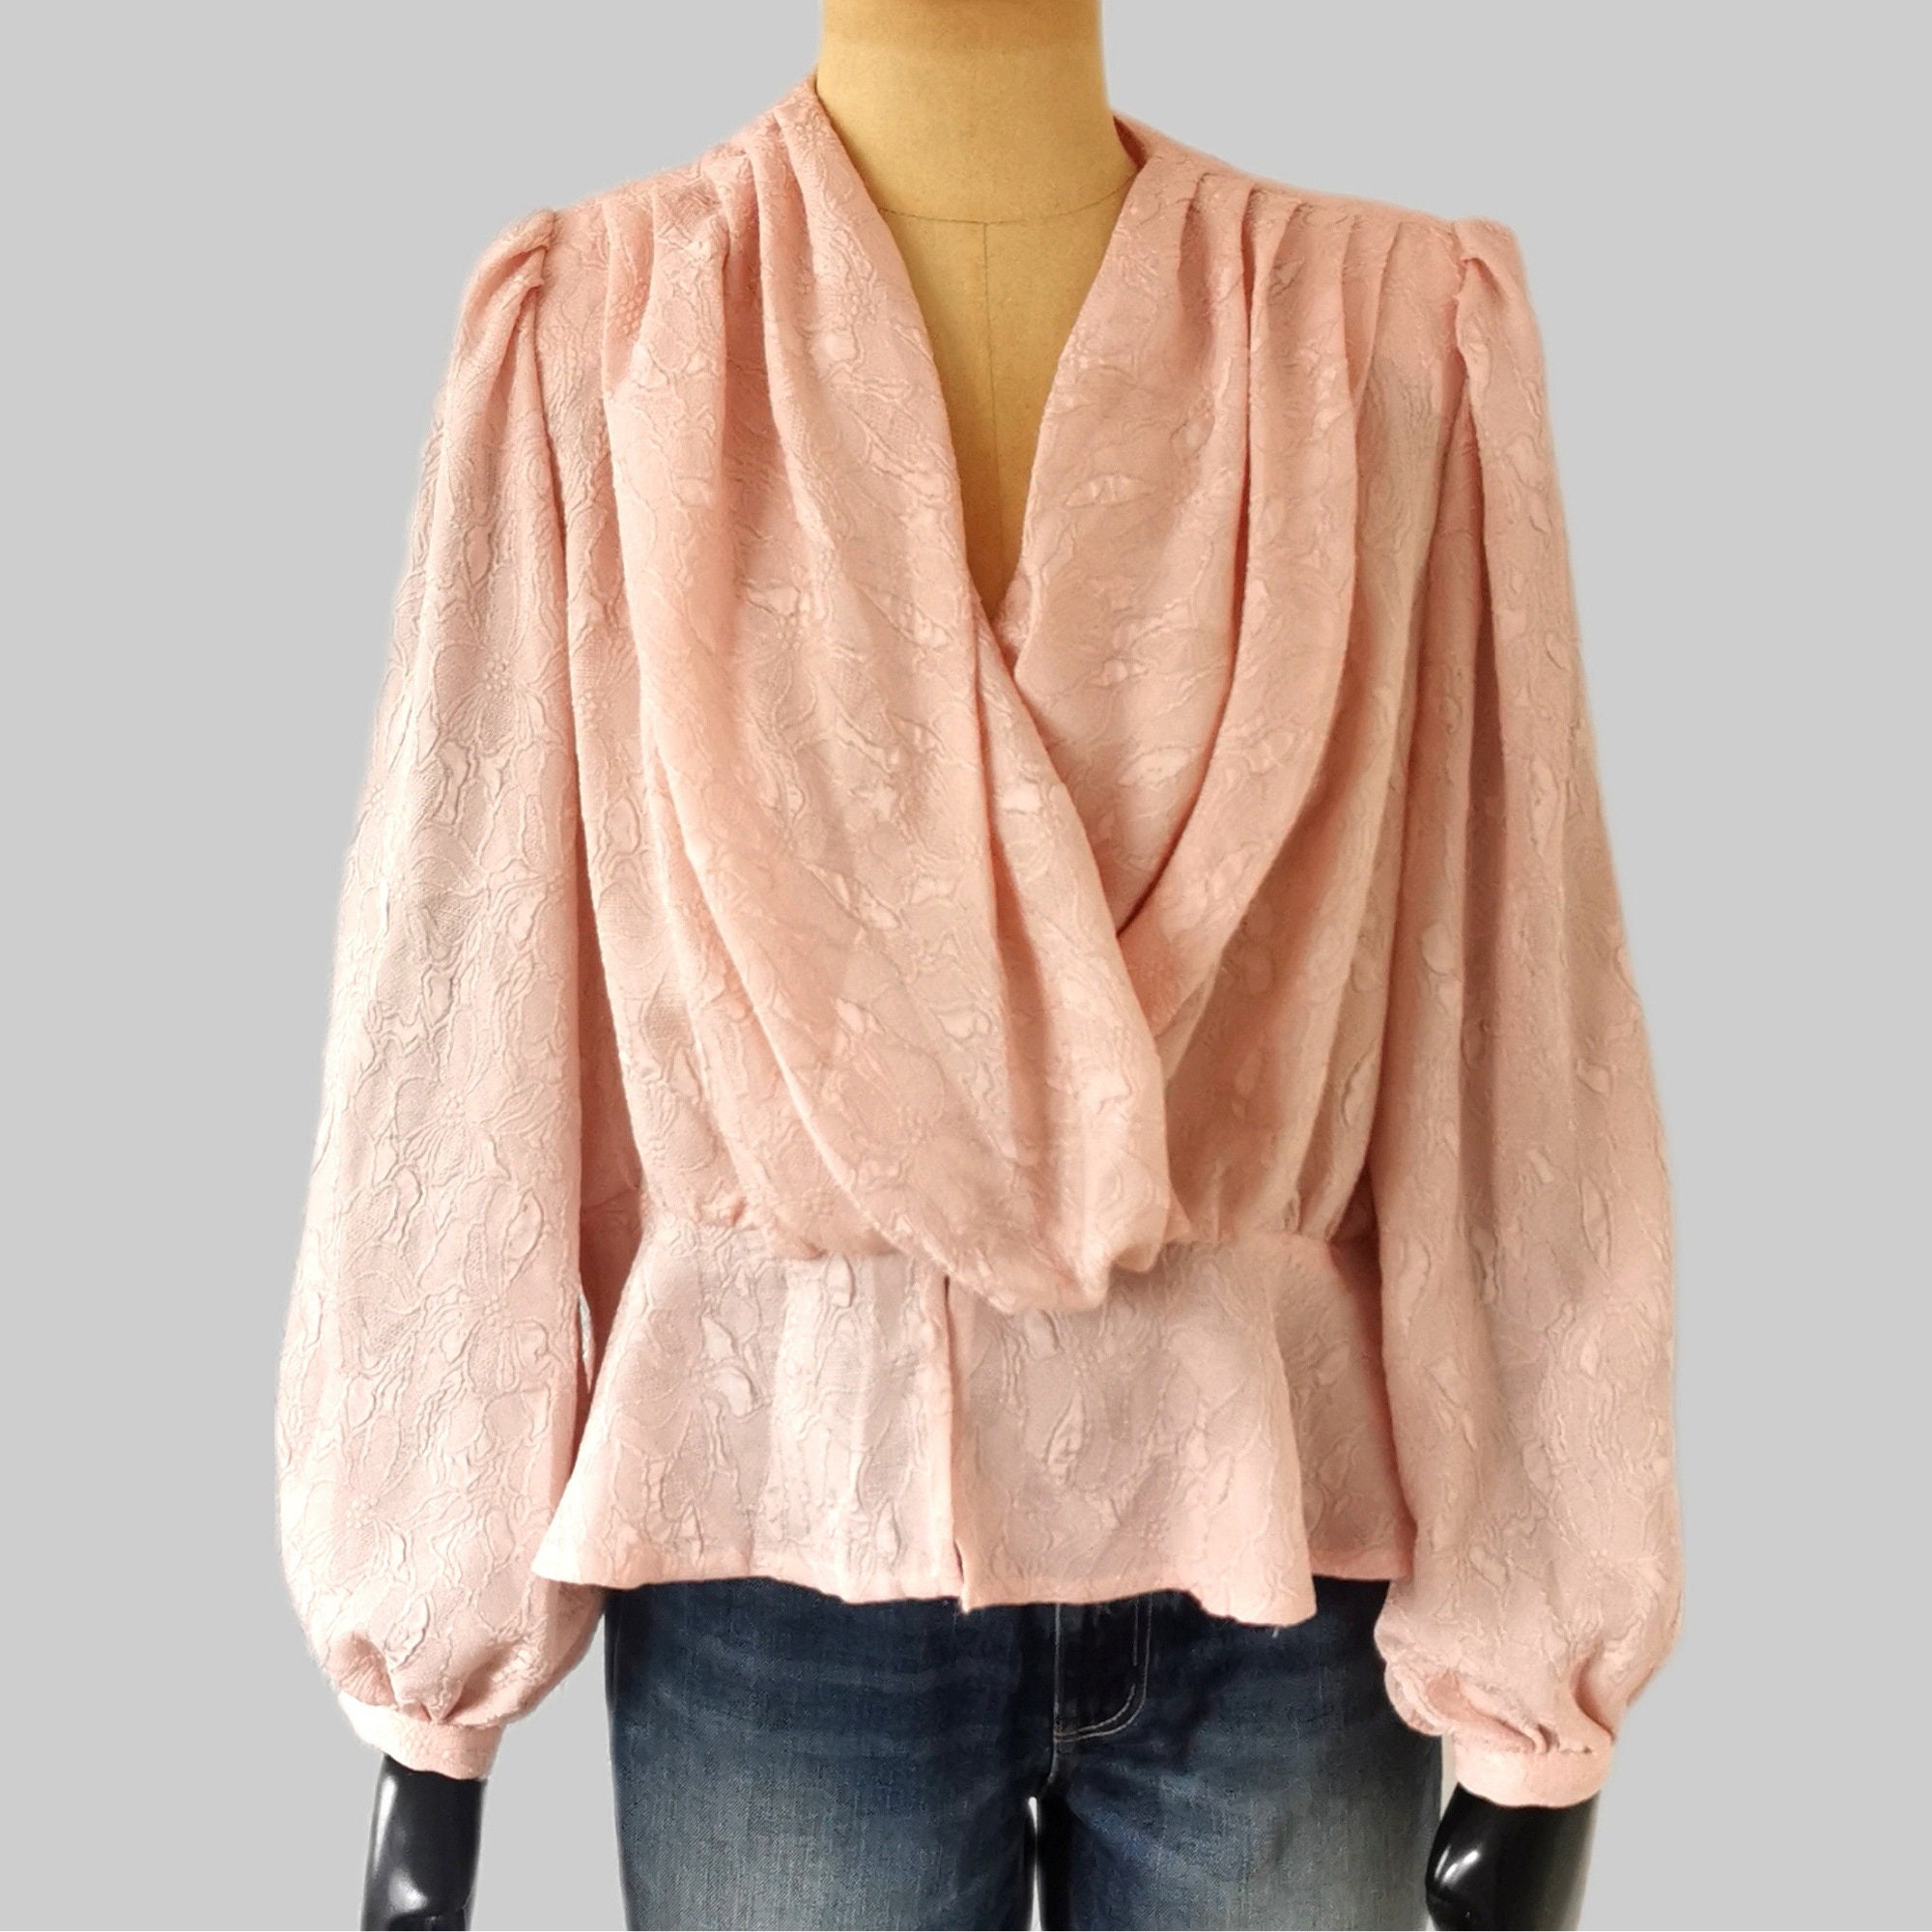 Powder Pink Long Sleeves Women Wrap Top, Multiway Versatile Casual Hippie  Blouse, Fitted Winter Top, Tie Around Yoga Wrap Shirt for Work 